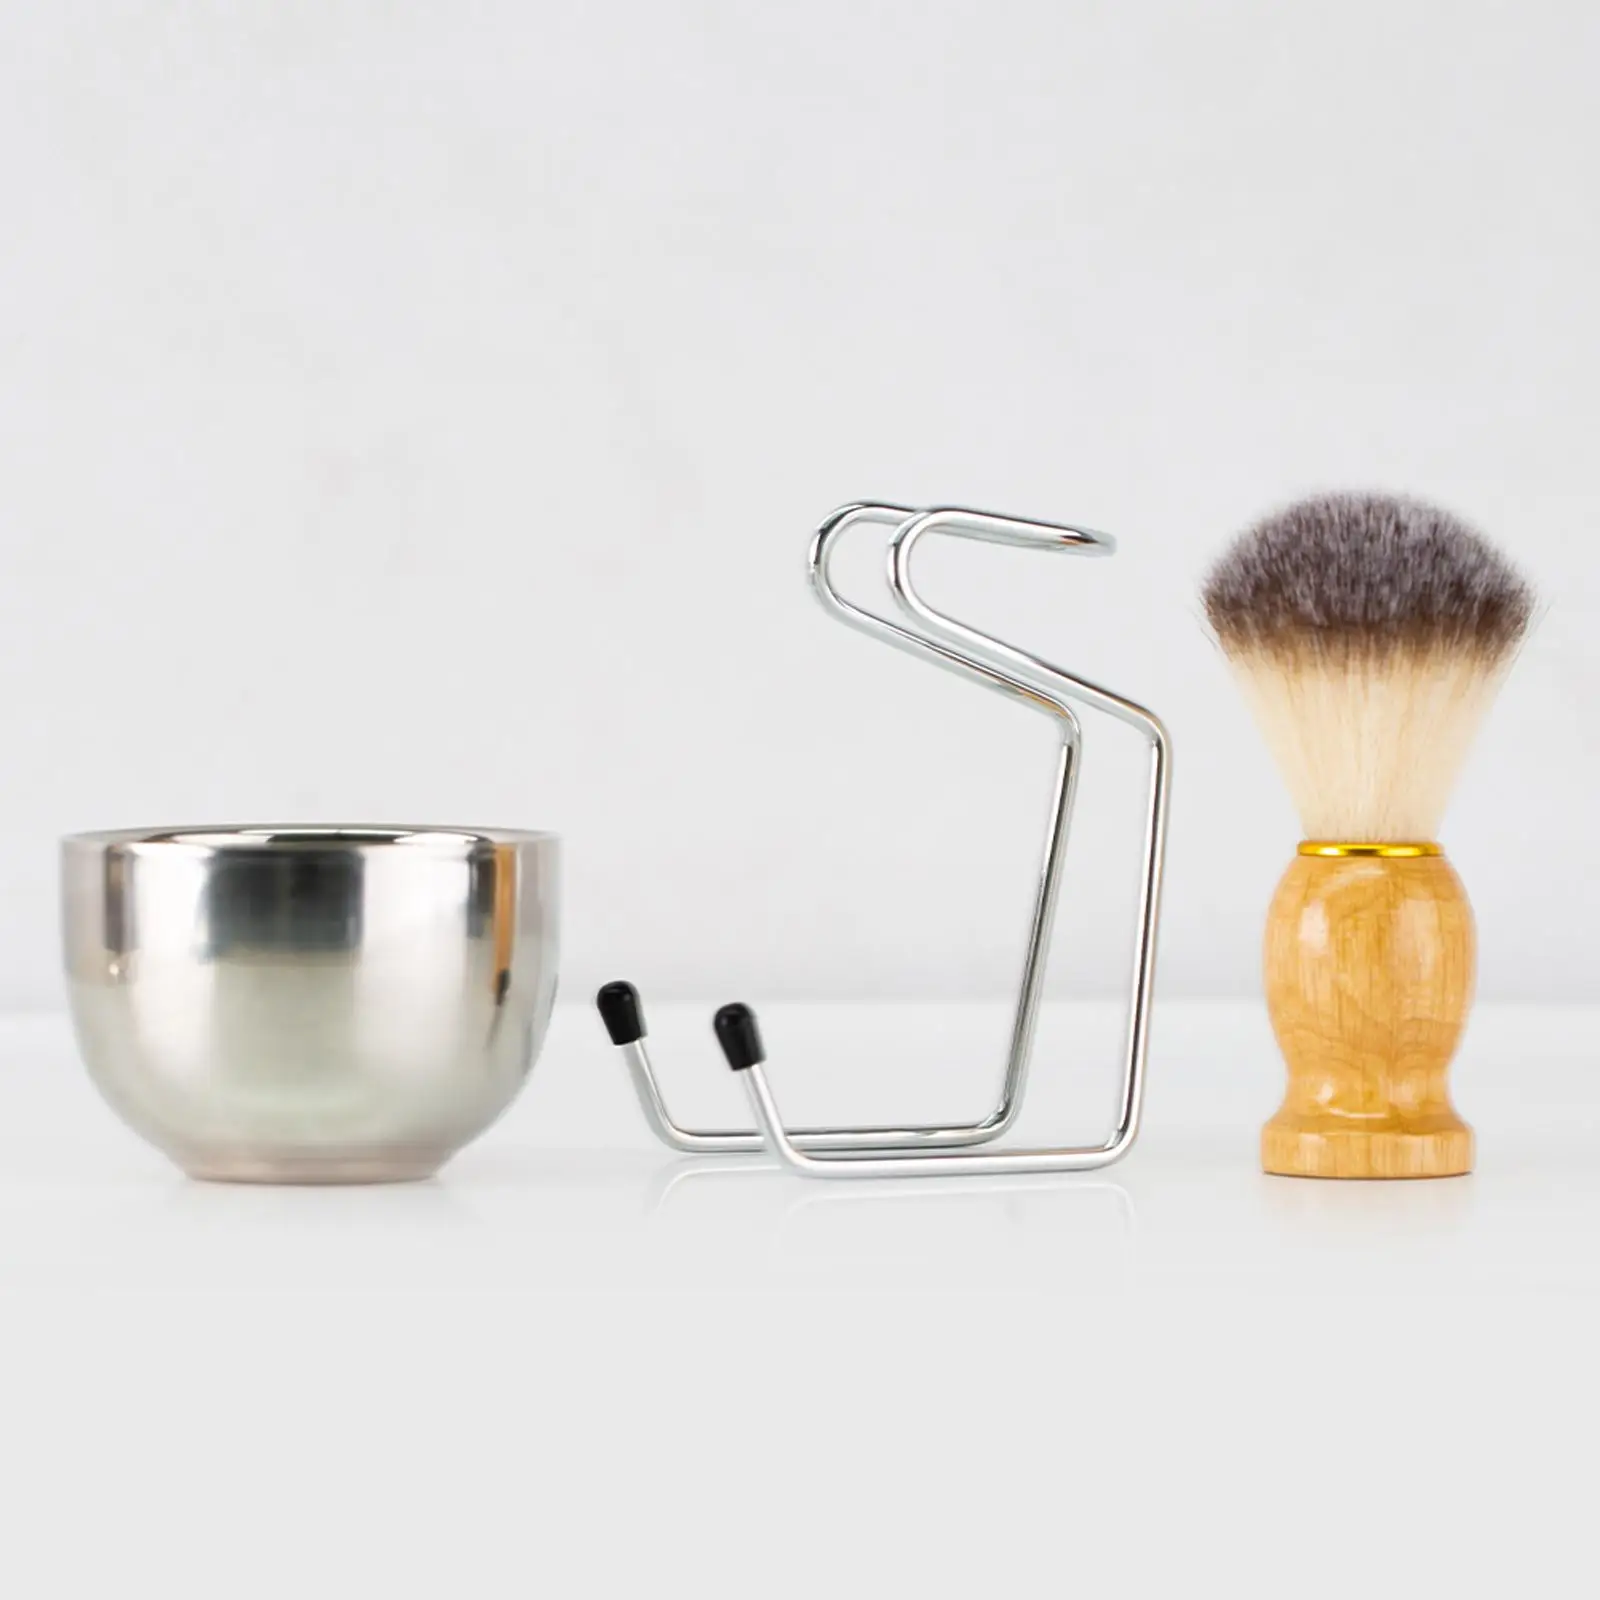 Stainless Steel Shaving   Brush, Easy to Install Perfect Gift for Your Father Husband Boyfriend Durable Accessories